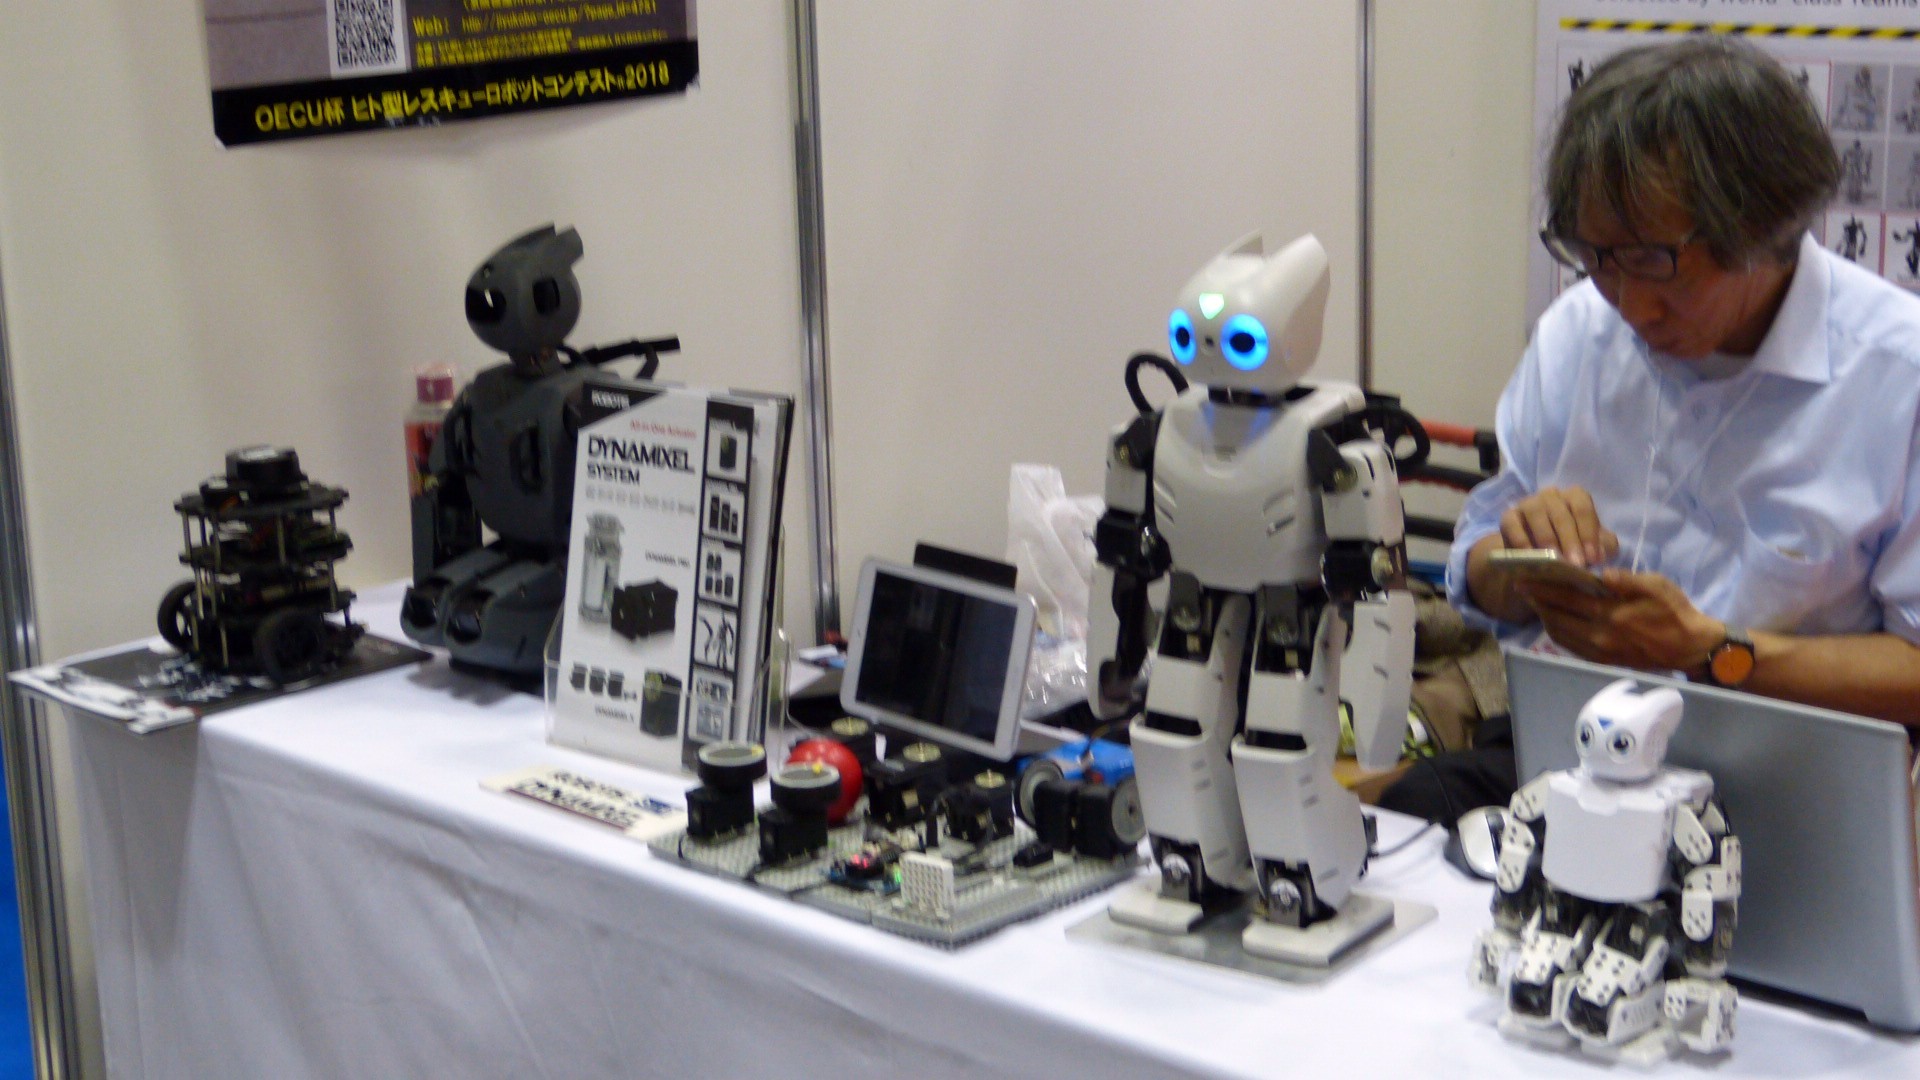 a man uses a smartphone behind a counter of small robots and pamphlets